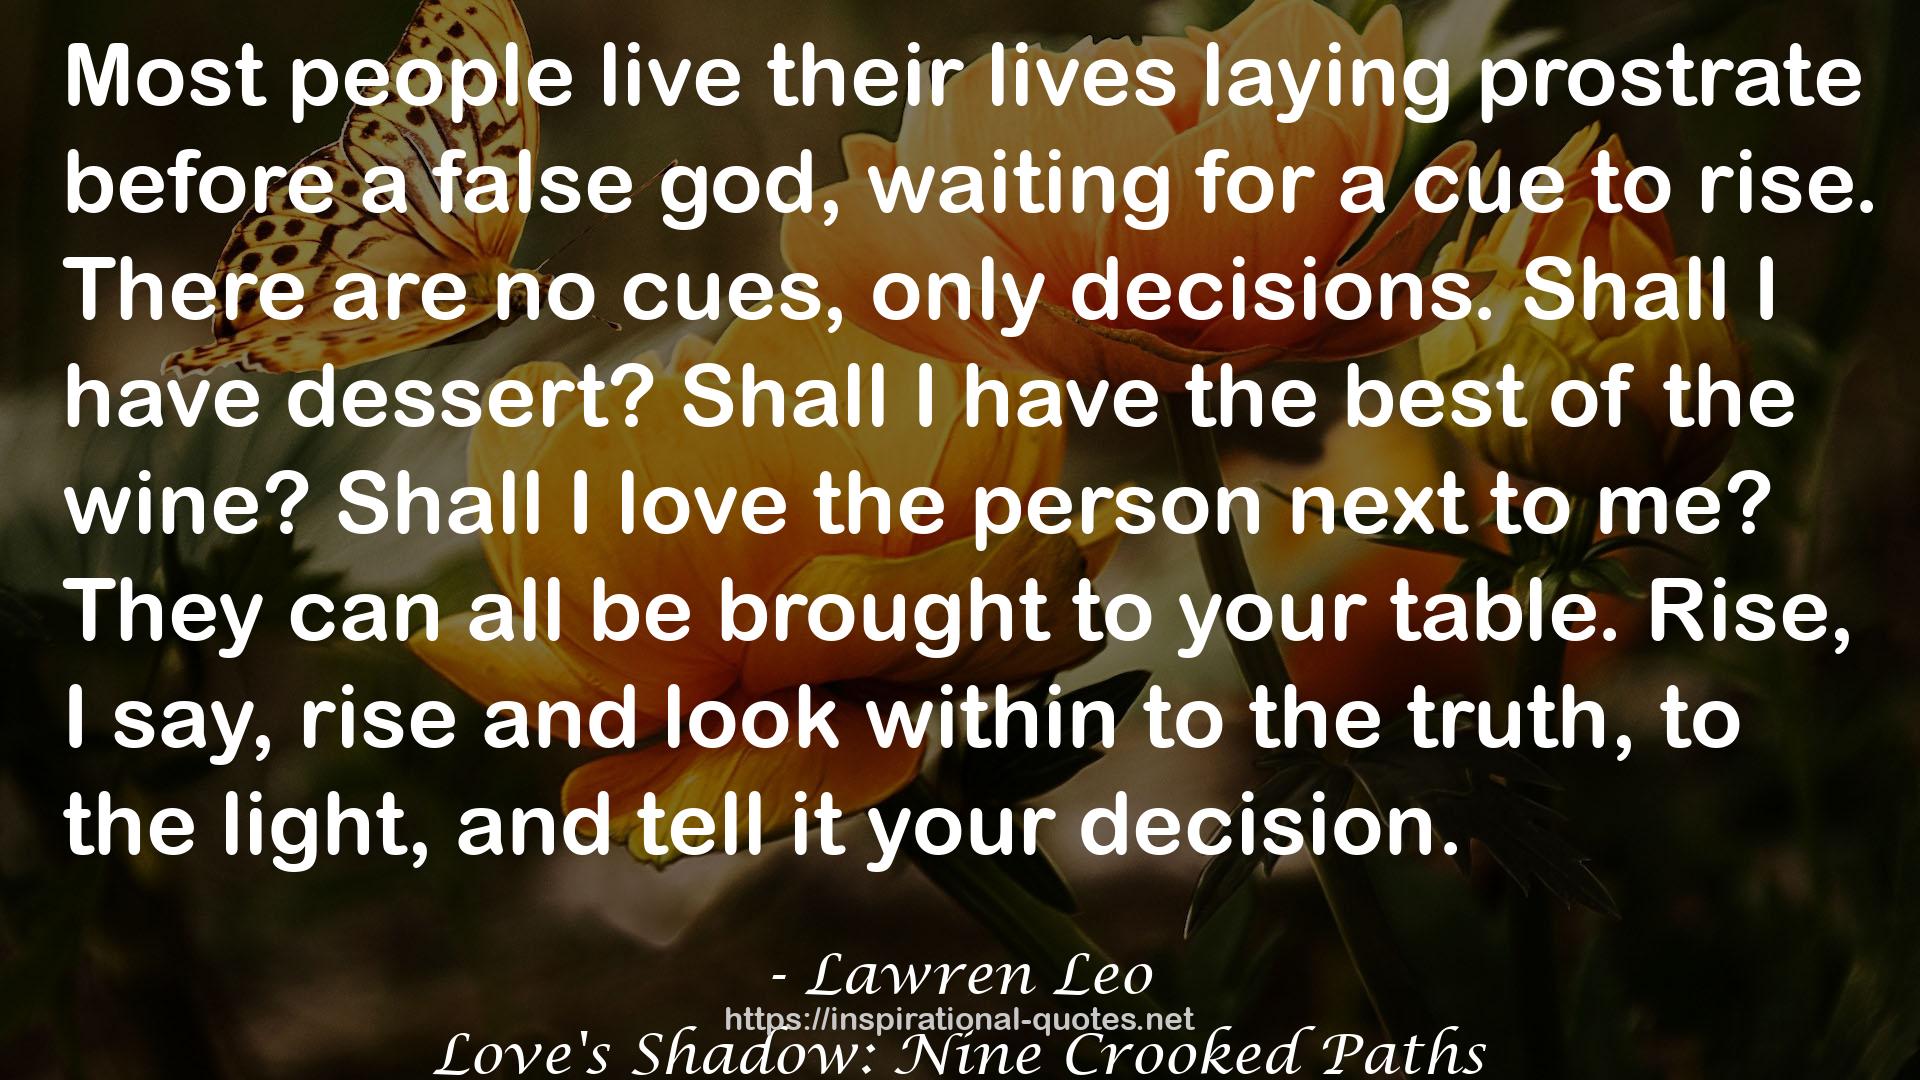 Love's Shadow: Nine Crooked Paths QUOTES